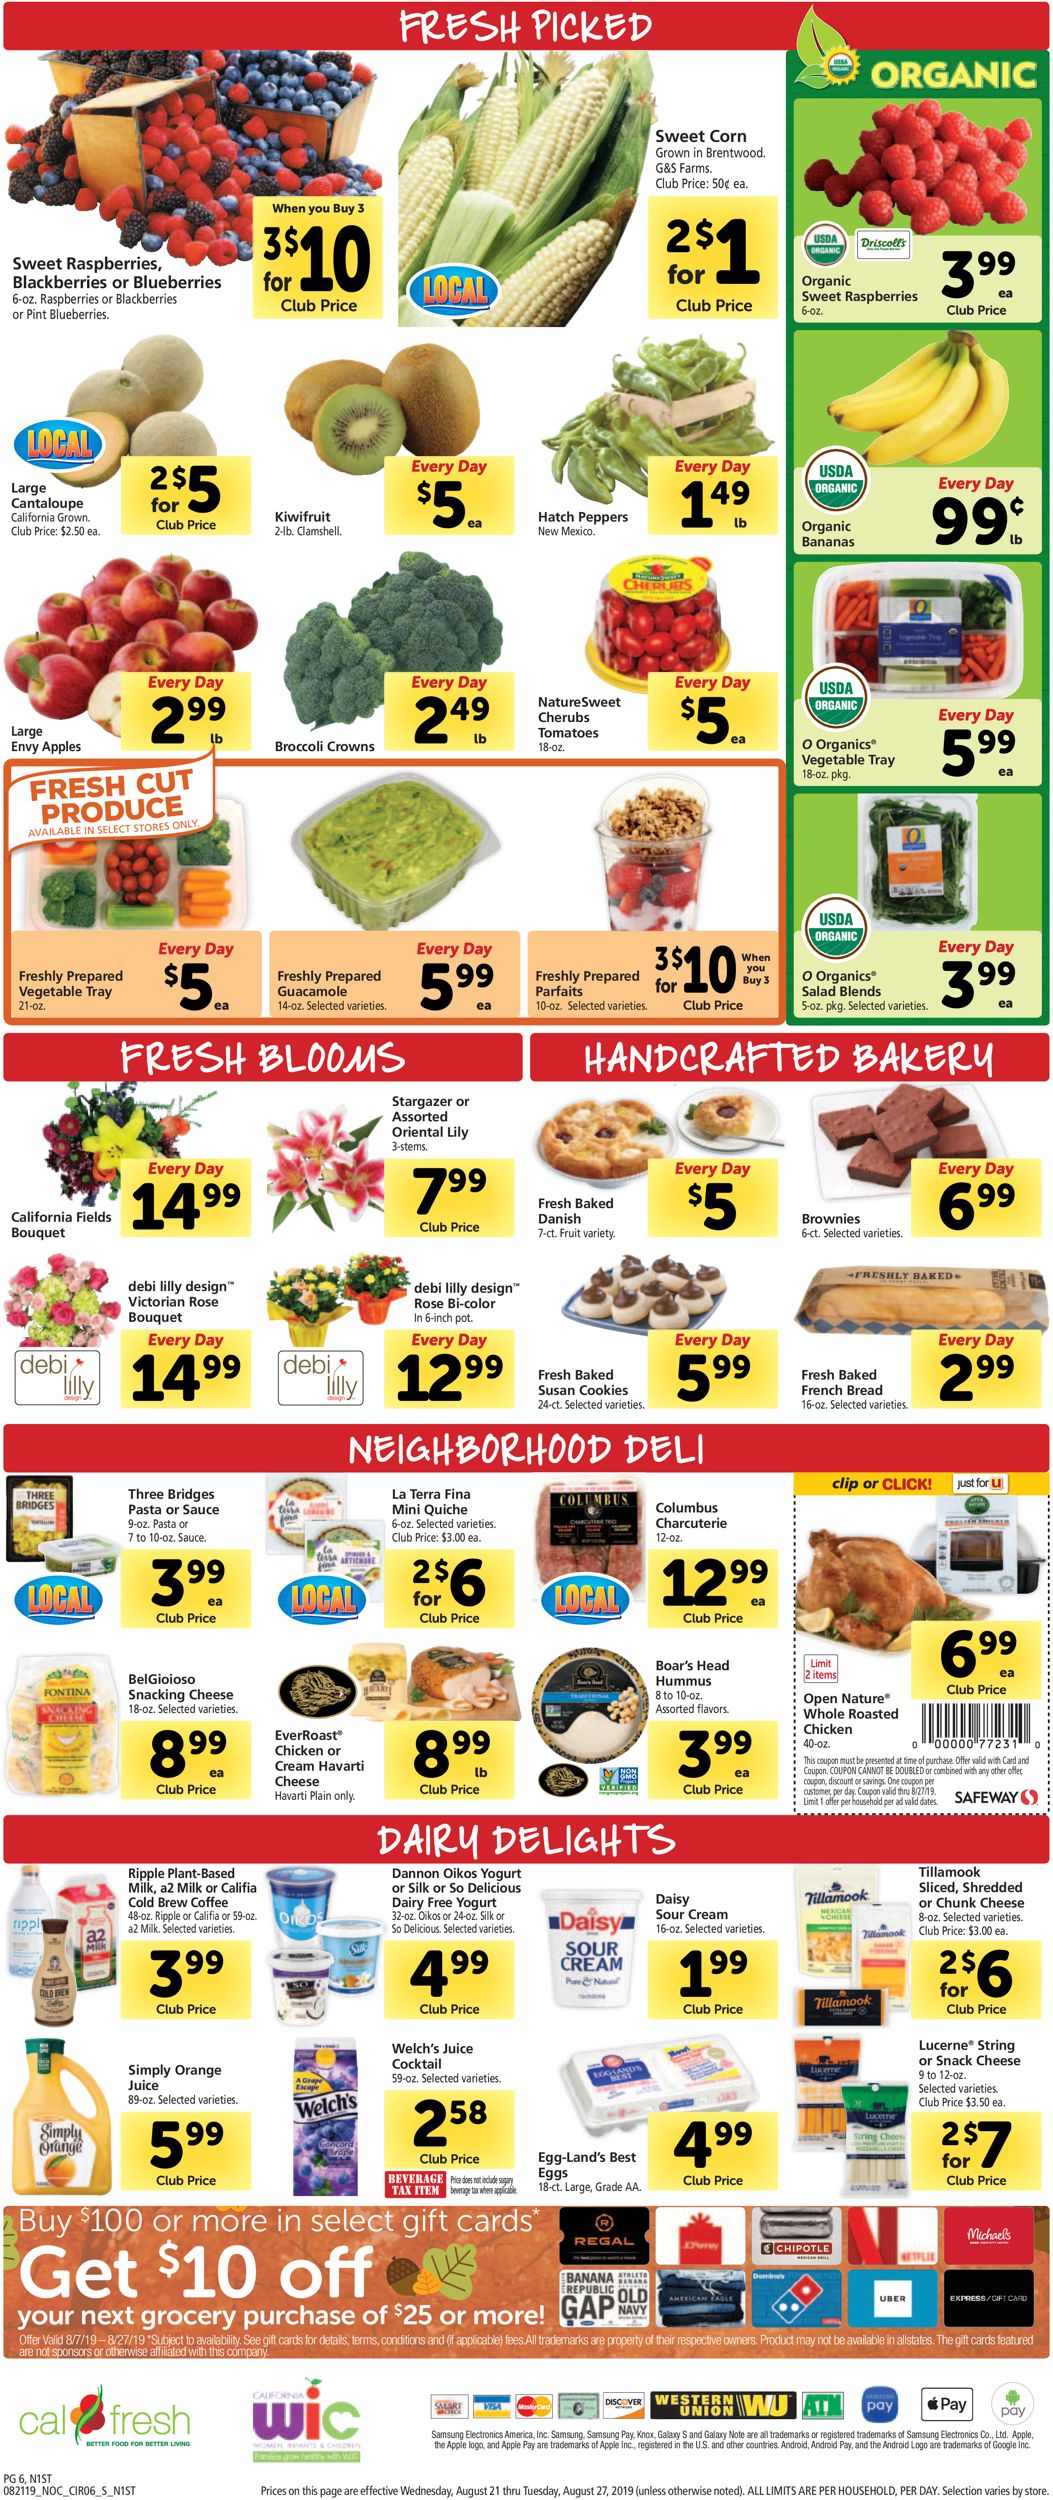 Safeway Current weekly ad 08/21 - 08/27/2019 [8] - frequent-ads.com